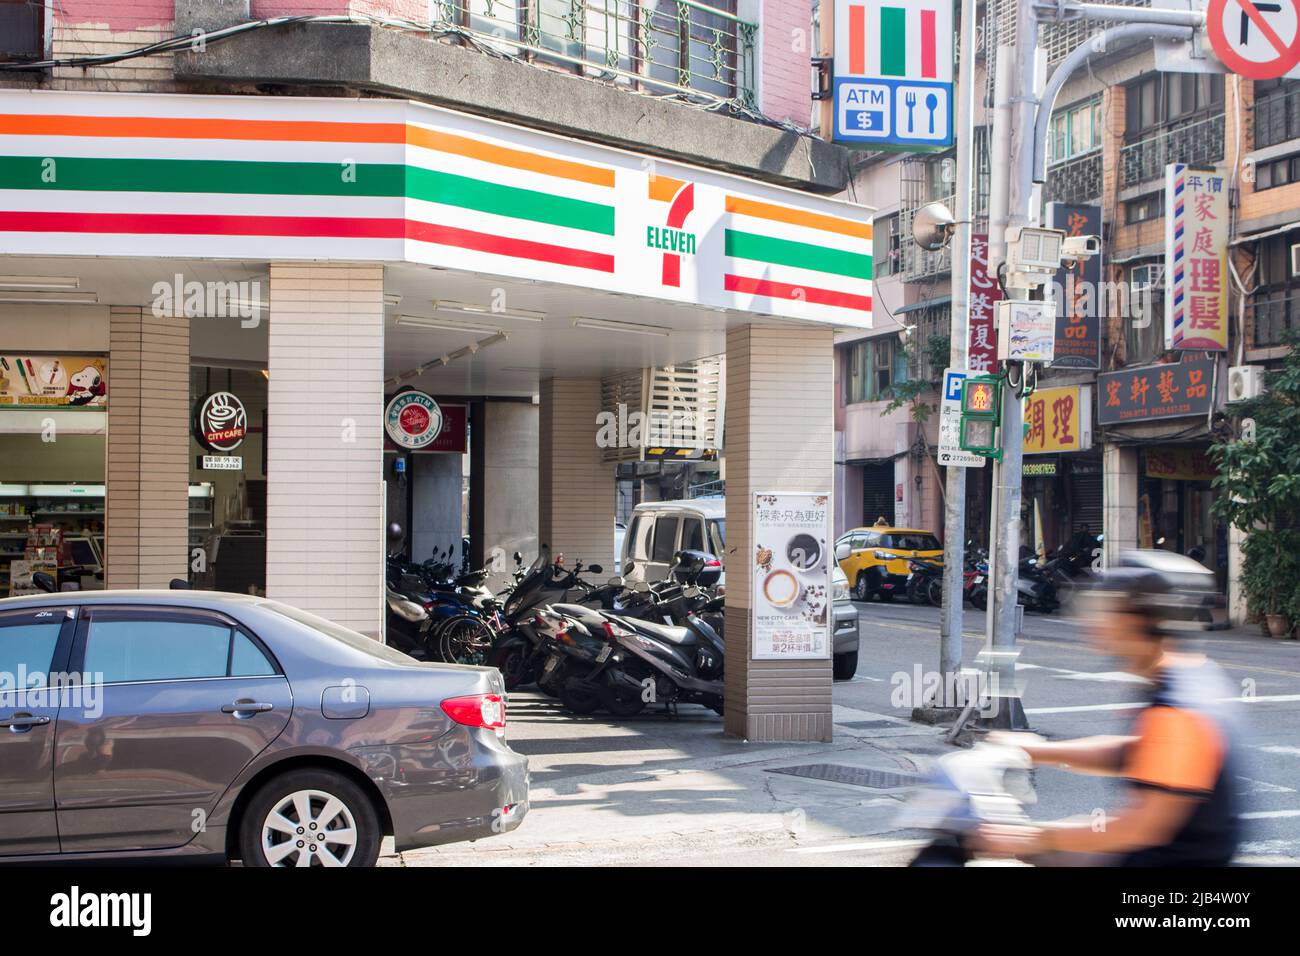 Taipei, Taiwan - Dec 17 2019: 7-eleven, convenience store chain in Taiwan by President Chain Store Corp under Uni-President Enterprises, in downtown Stock Photo